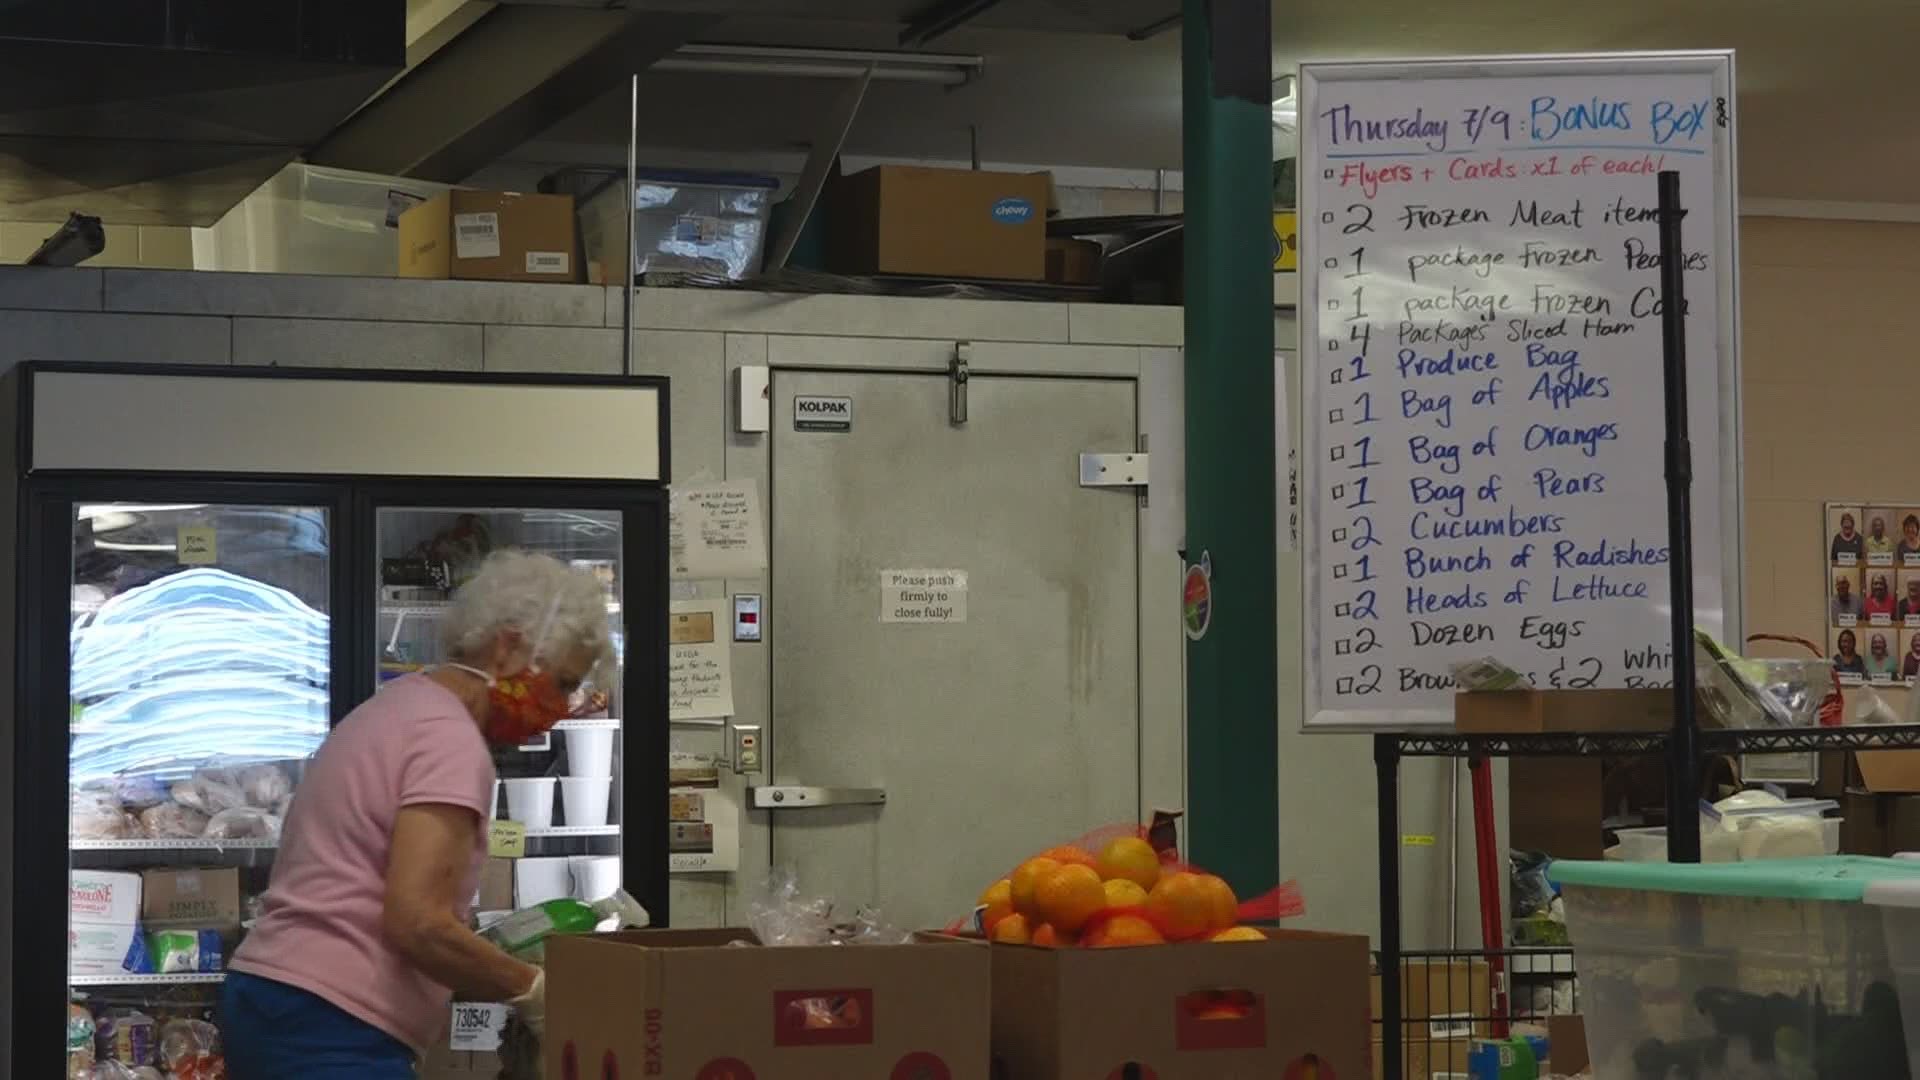 Community Action House has worked to make food more accessible during the pandemic.